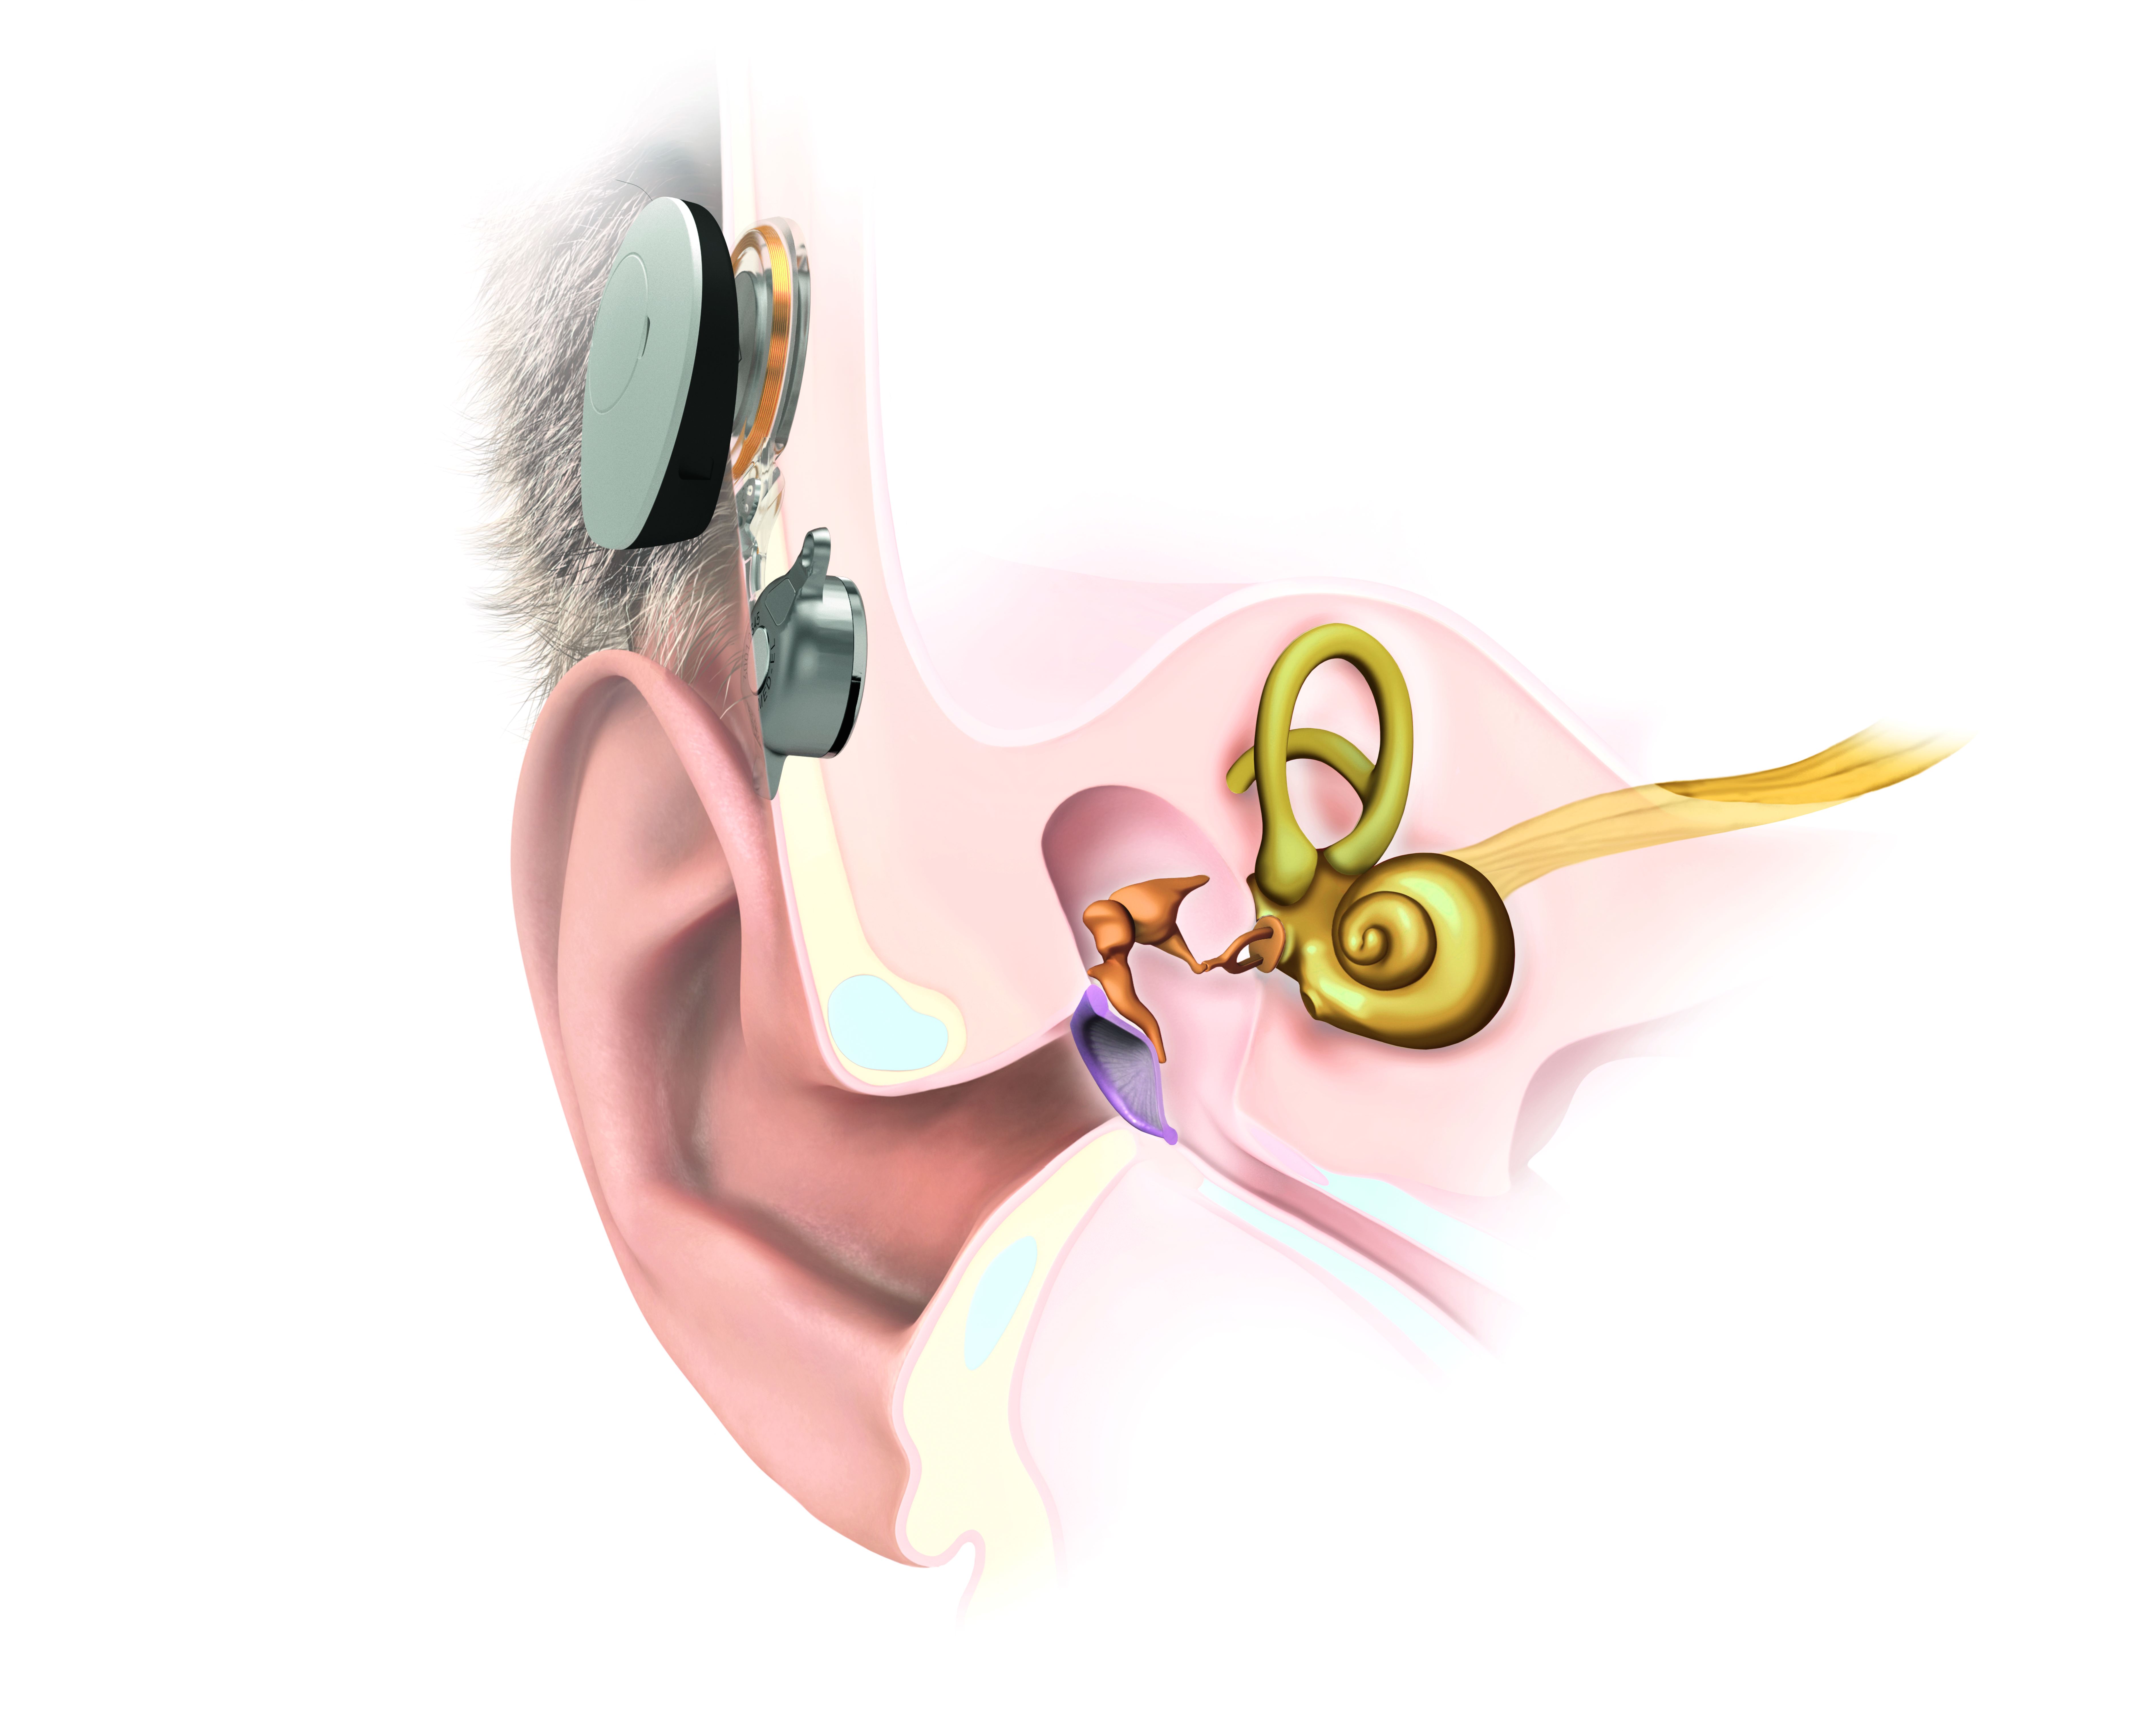 image of bone conduction implant placement and parts of the ear